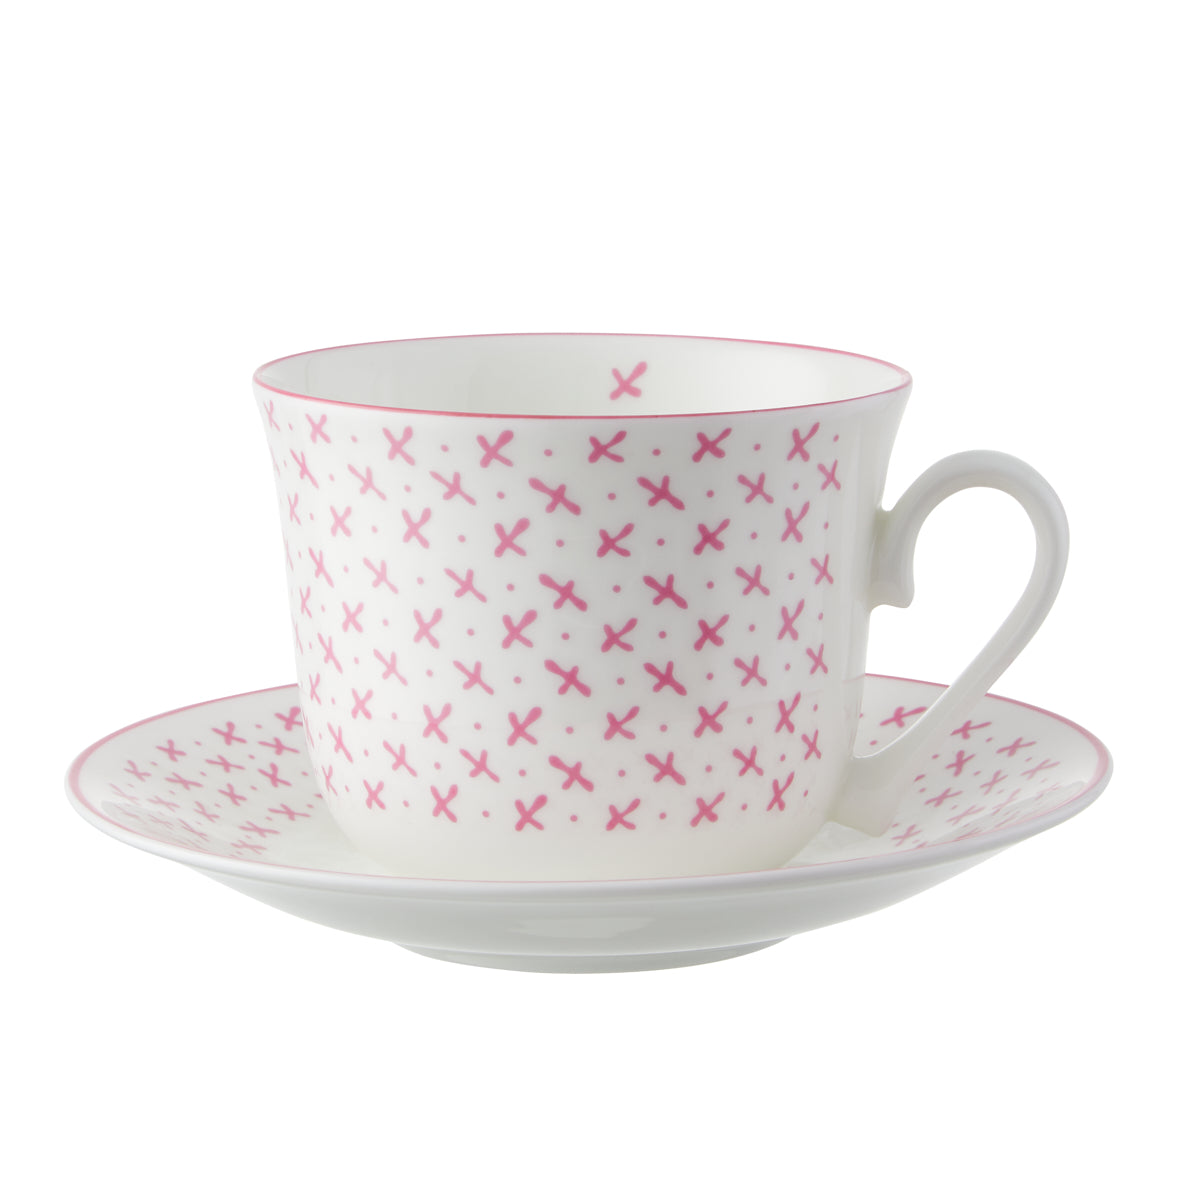 Chatsworth Breakfast Cup & Saucer - Pink Sprig